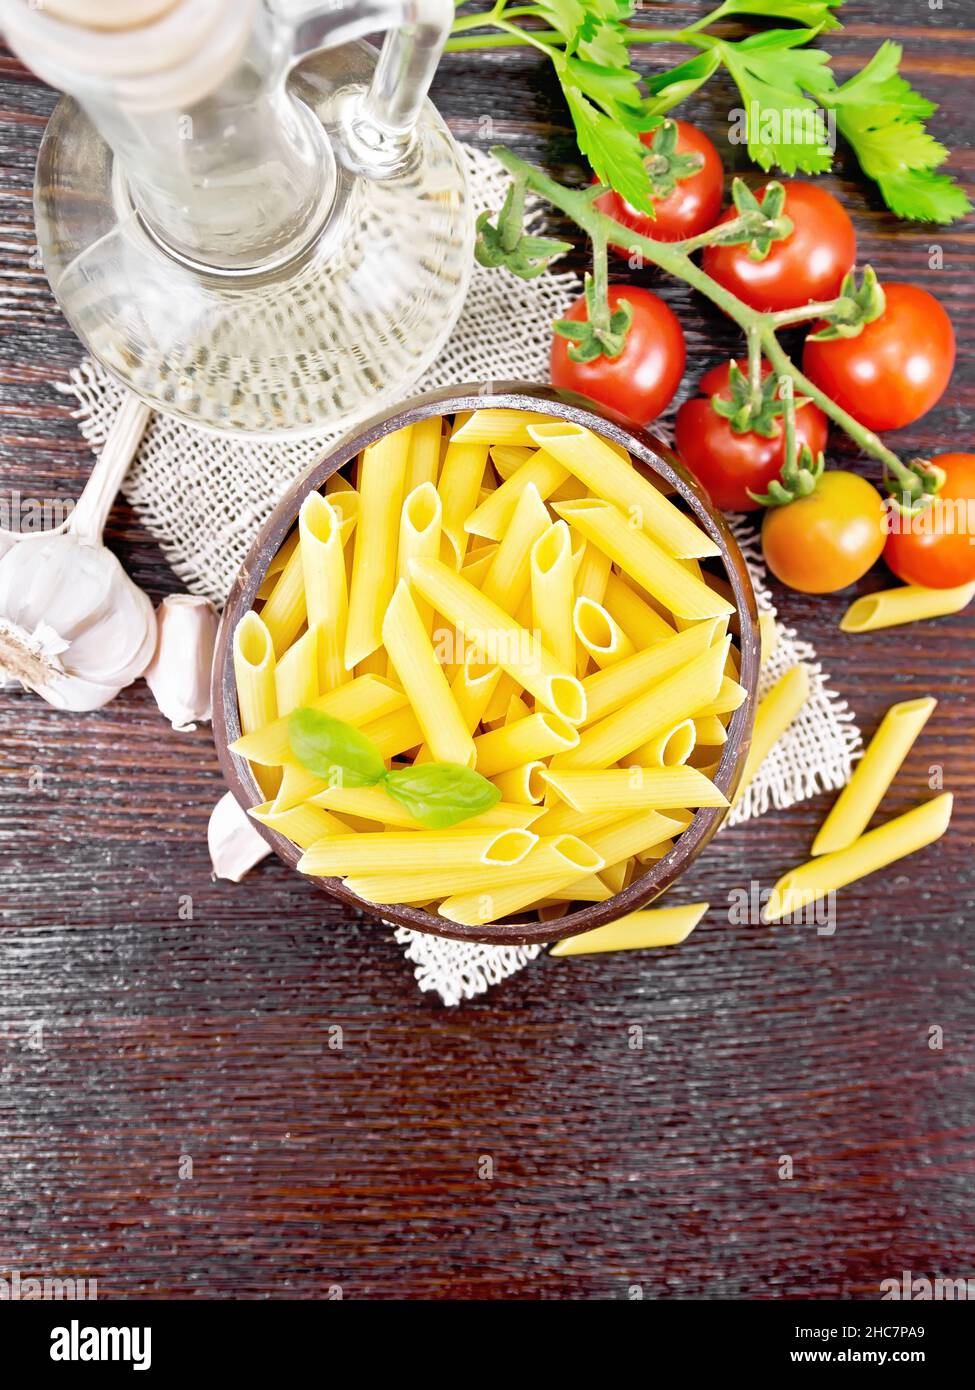 Wheat flour penne paste in a bowl of coconut shells on sacking, tomatoes, garlic, vegetable oil in a glass decanter and parsley on a wooden board back Stock Photo